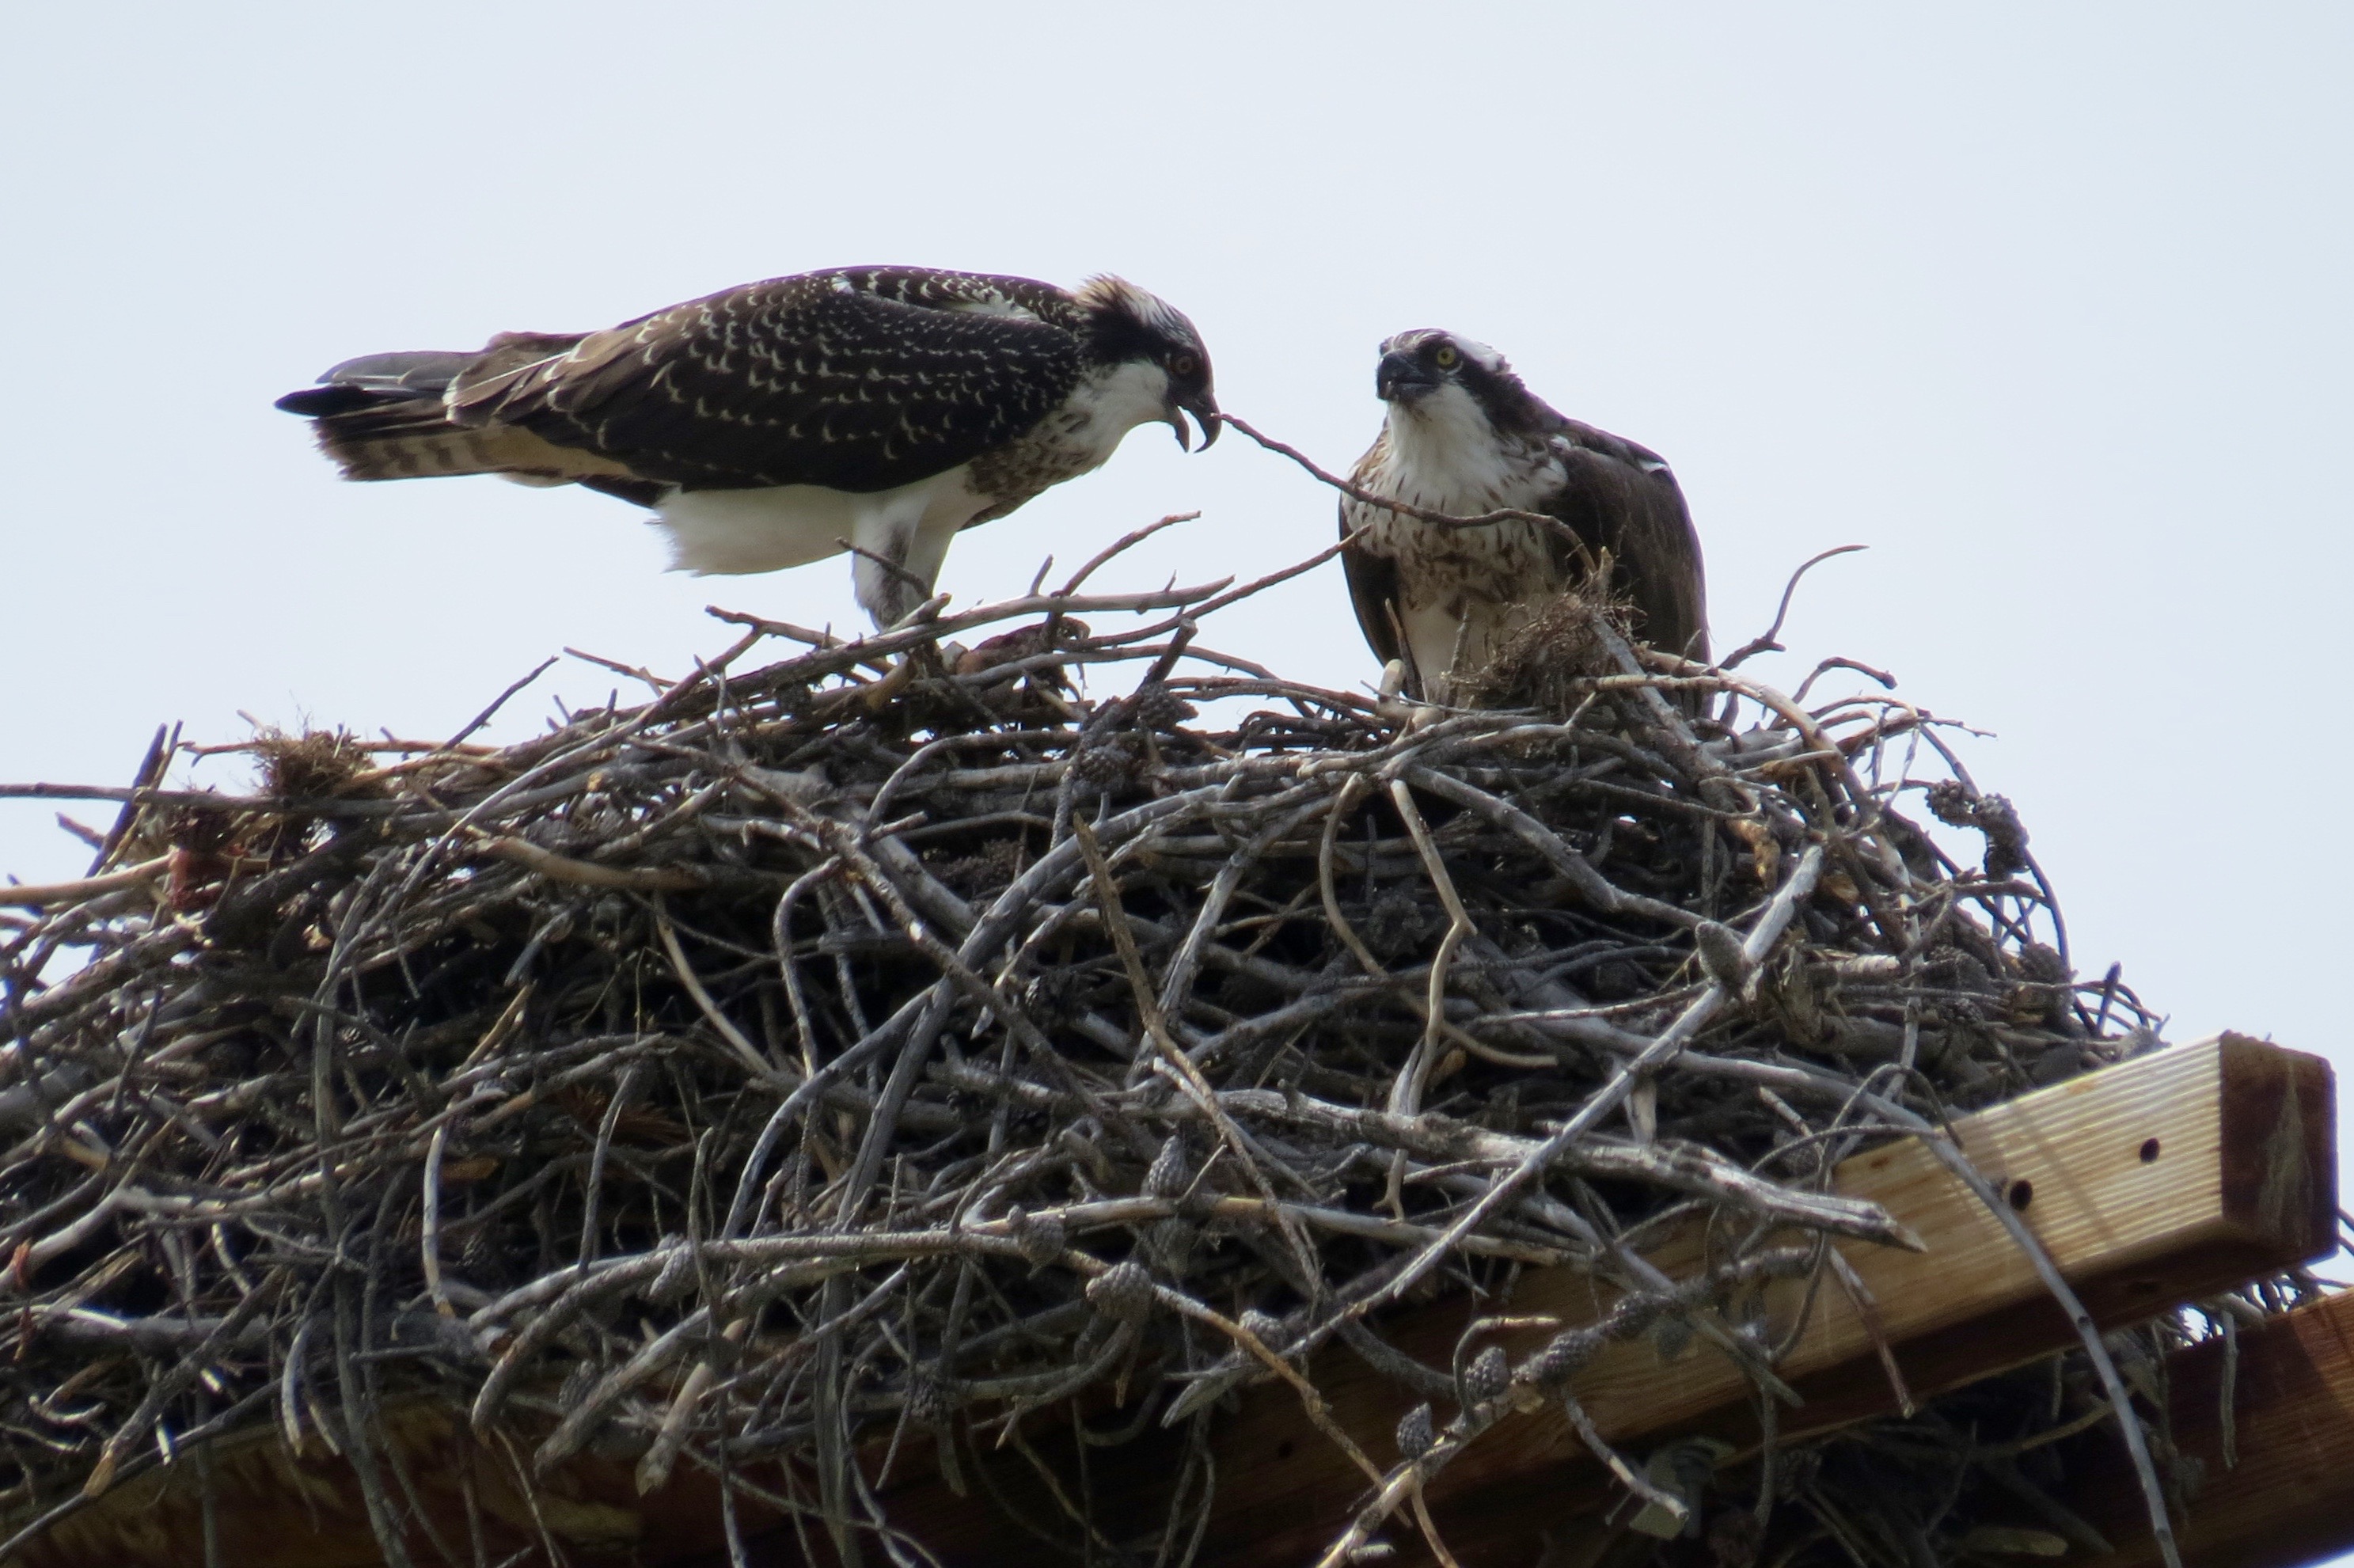 THESE JUVENILE OSPREYS WERE CHATTERING LOUDLY. ALTHOUGH WE THINK THEY HAVE FLEDGED AND CAN FLY, THEY CLEARLY DID NOT WANT TO TAKE OFF. MOM AND DAD ARE GONE, WE THINK. 